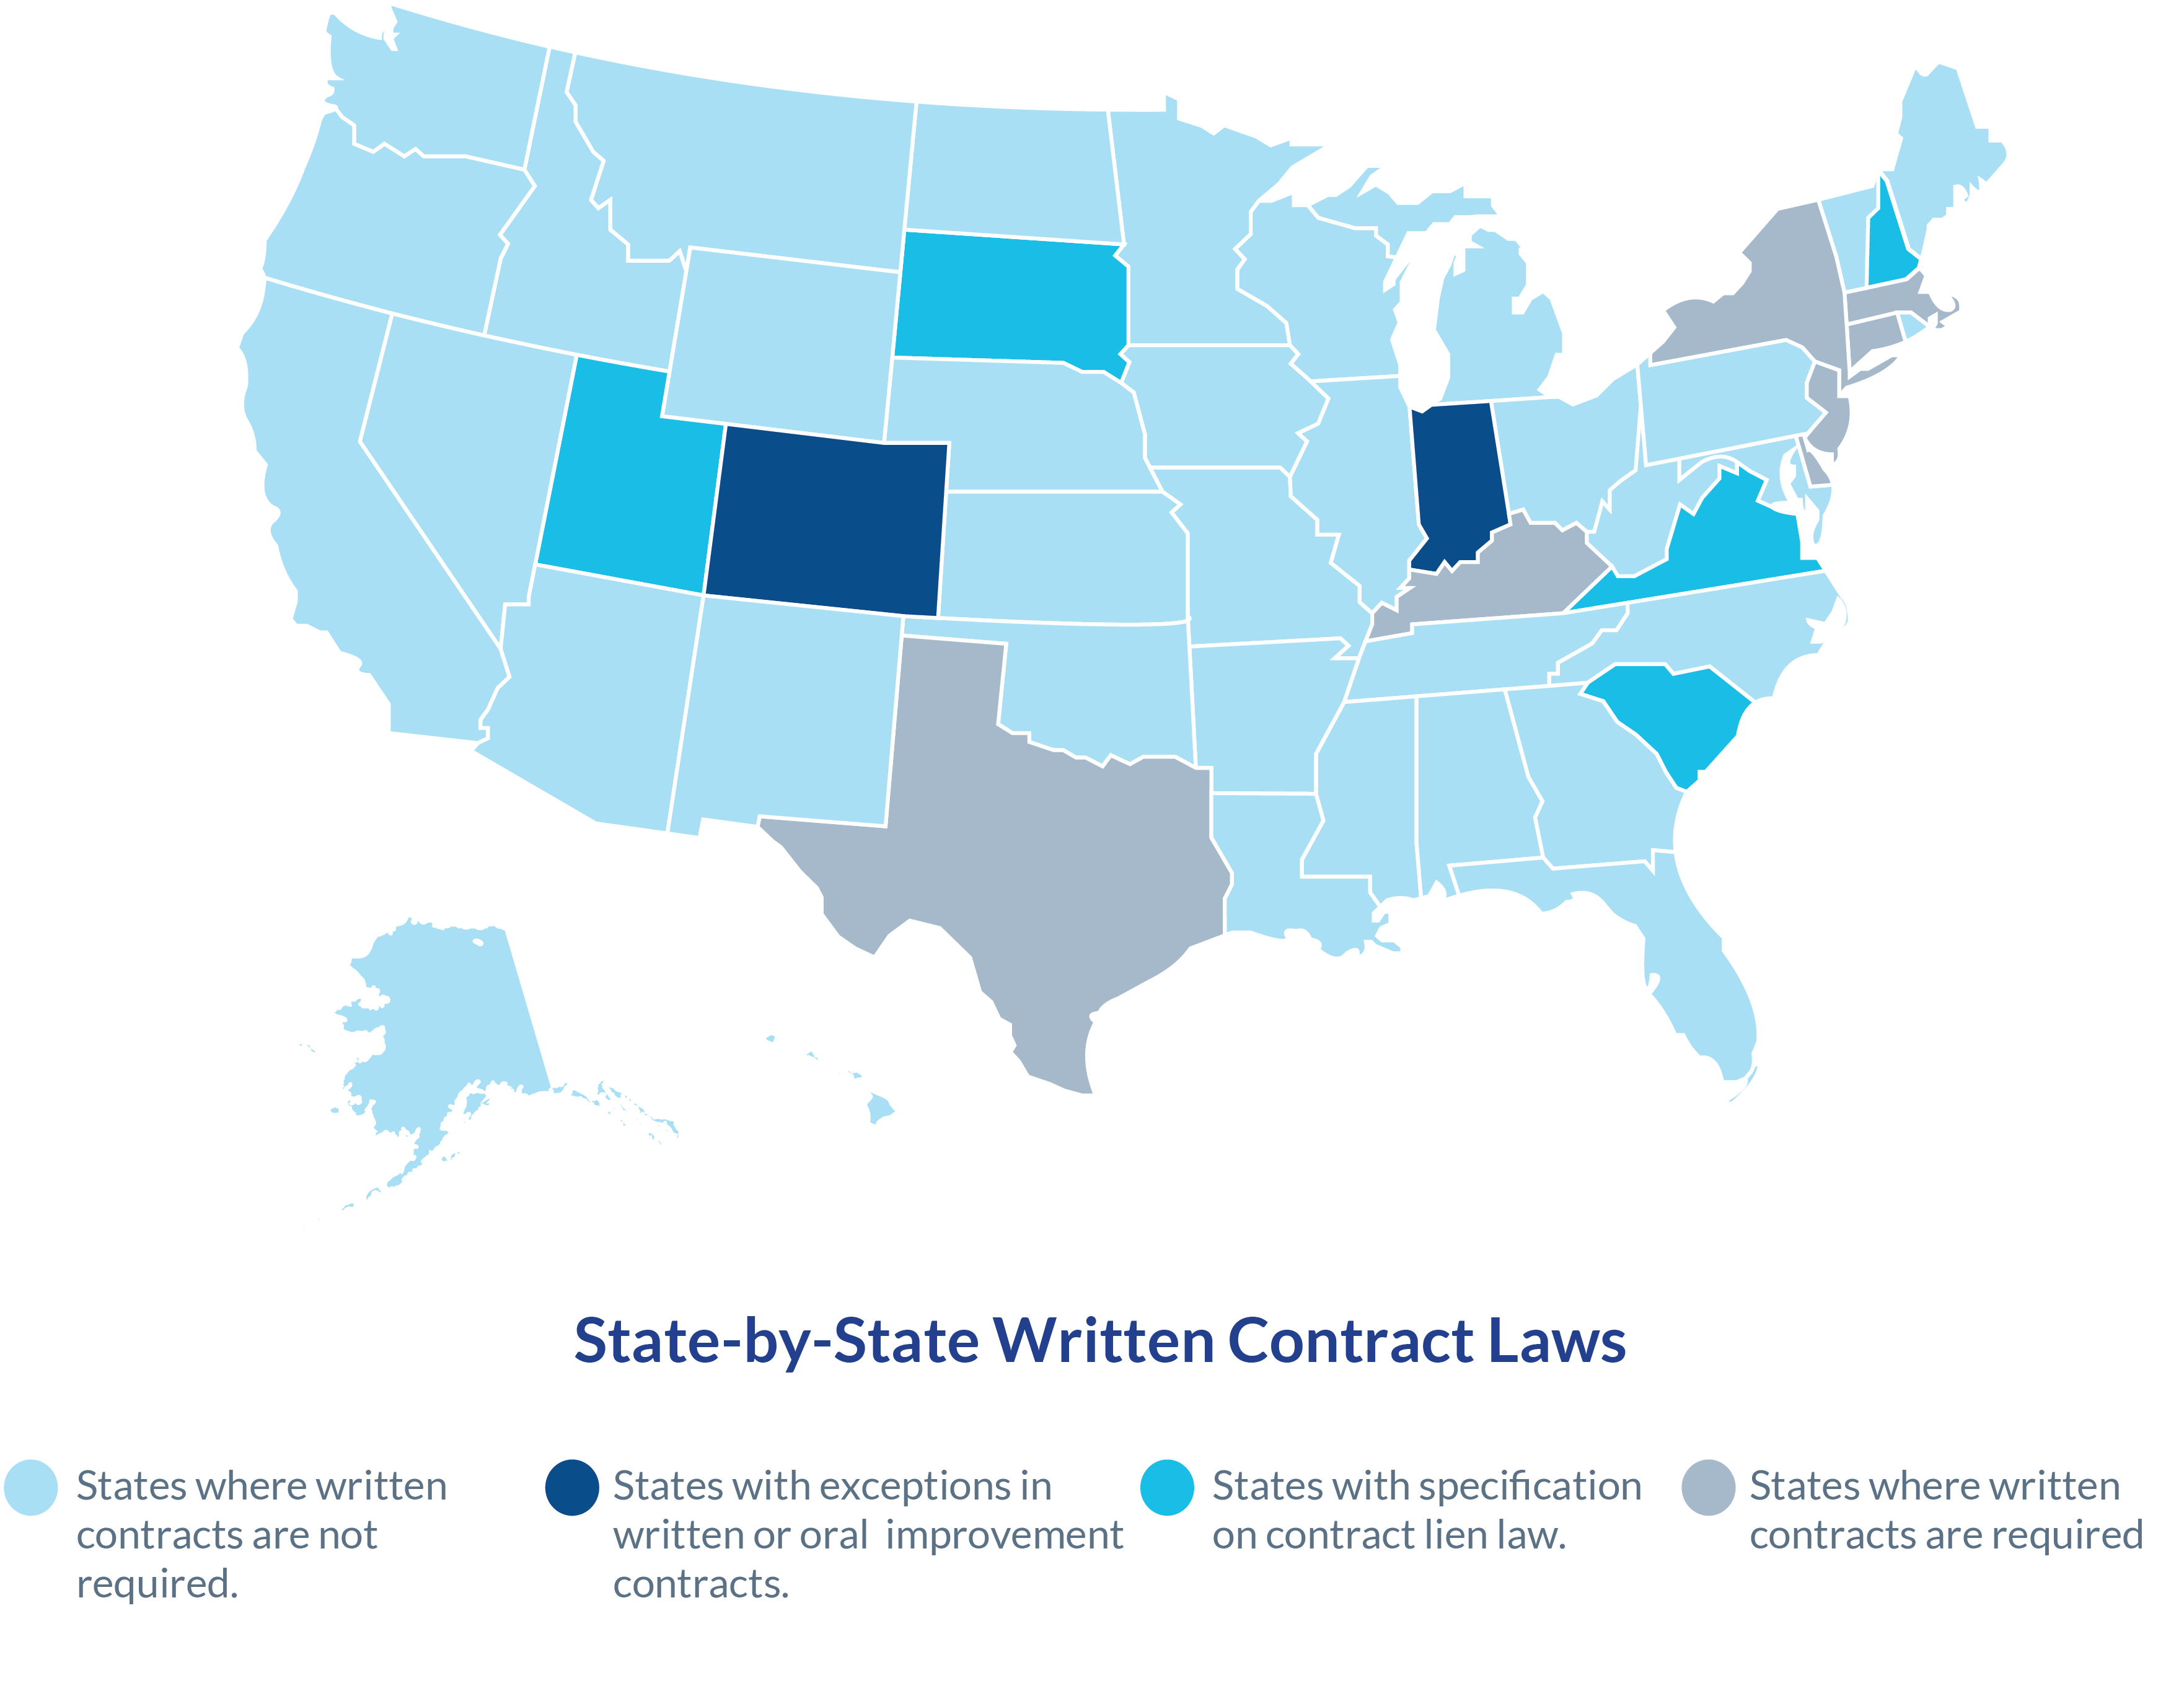 Can You File a Lien Without a Written Contract?